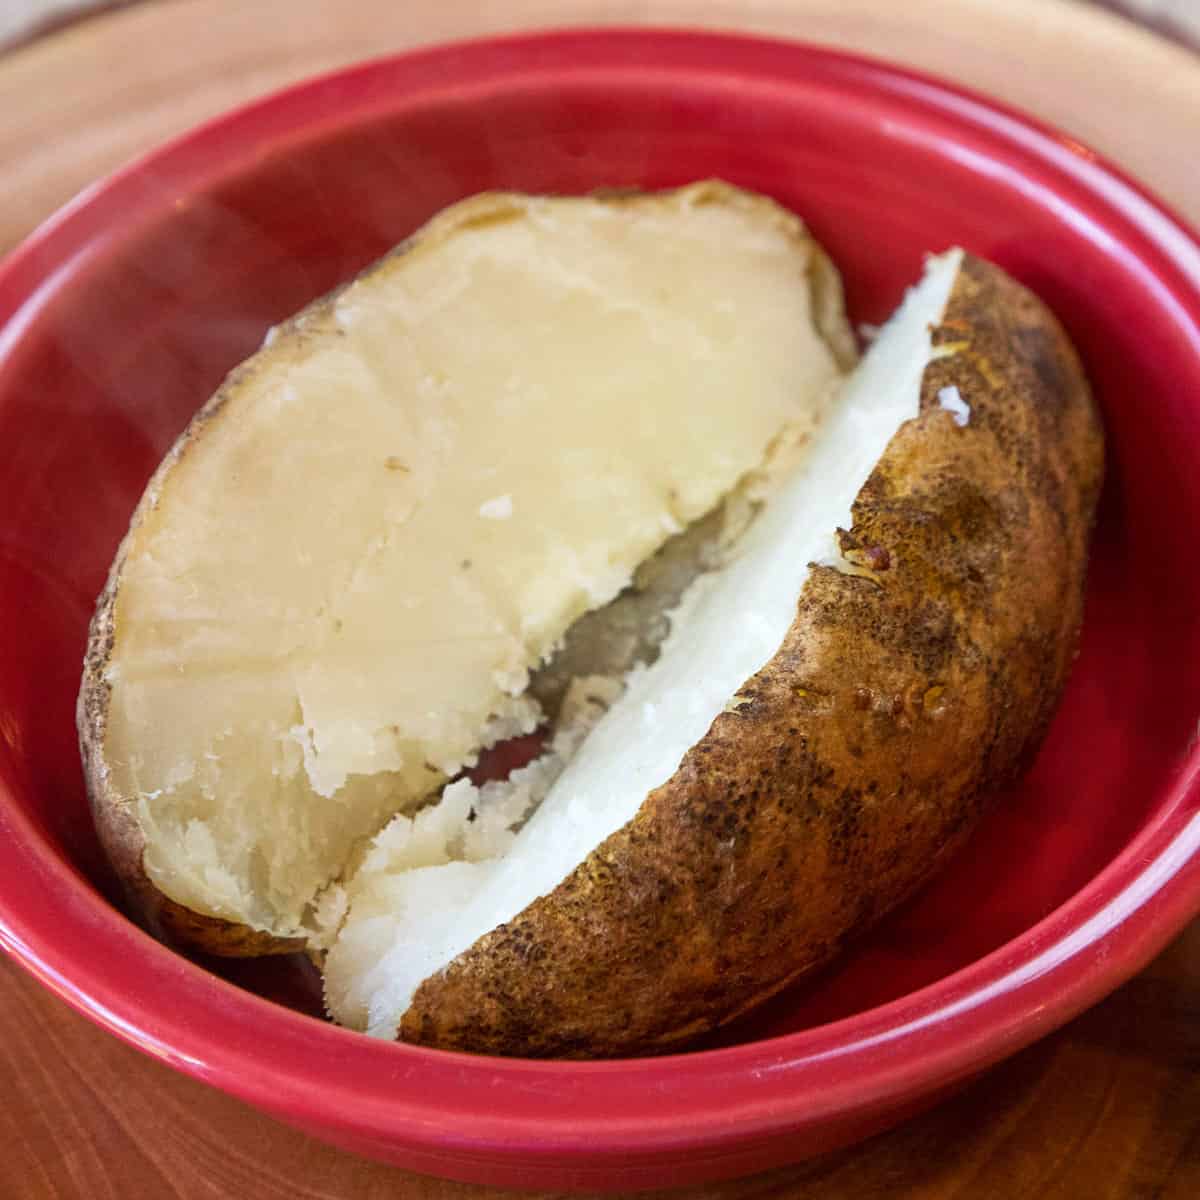 Baked potato in a bowl after being cooked in the oven without foil.